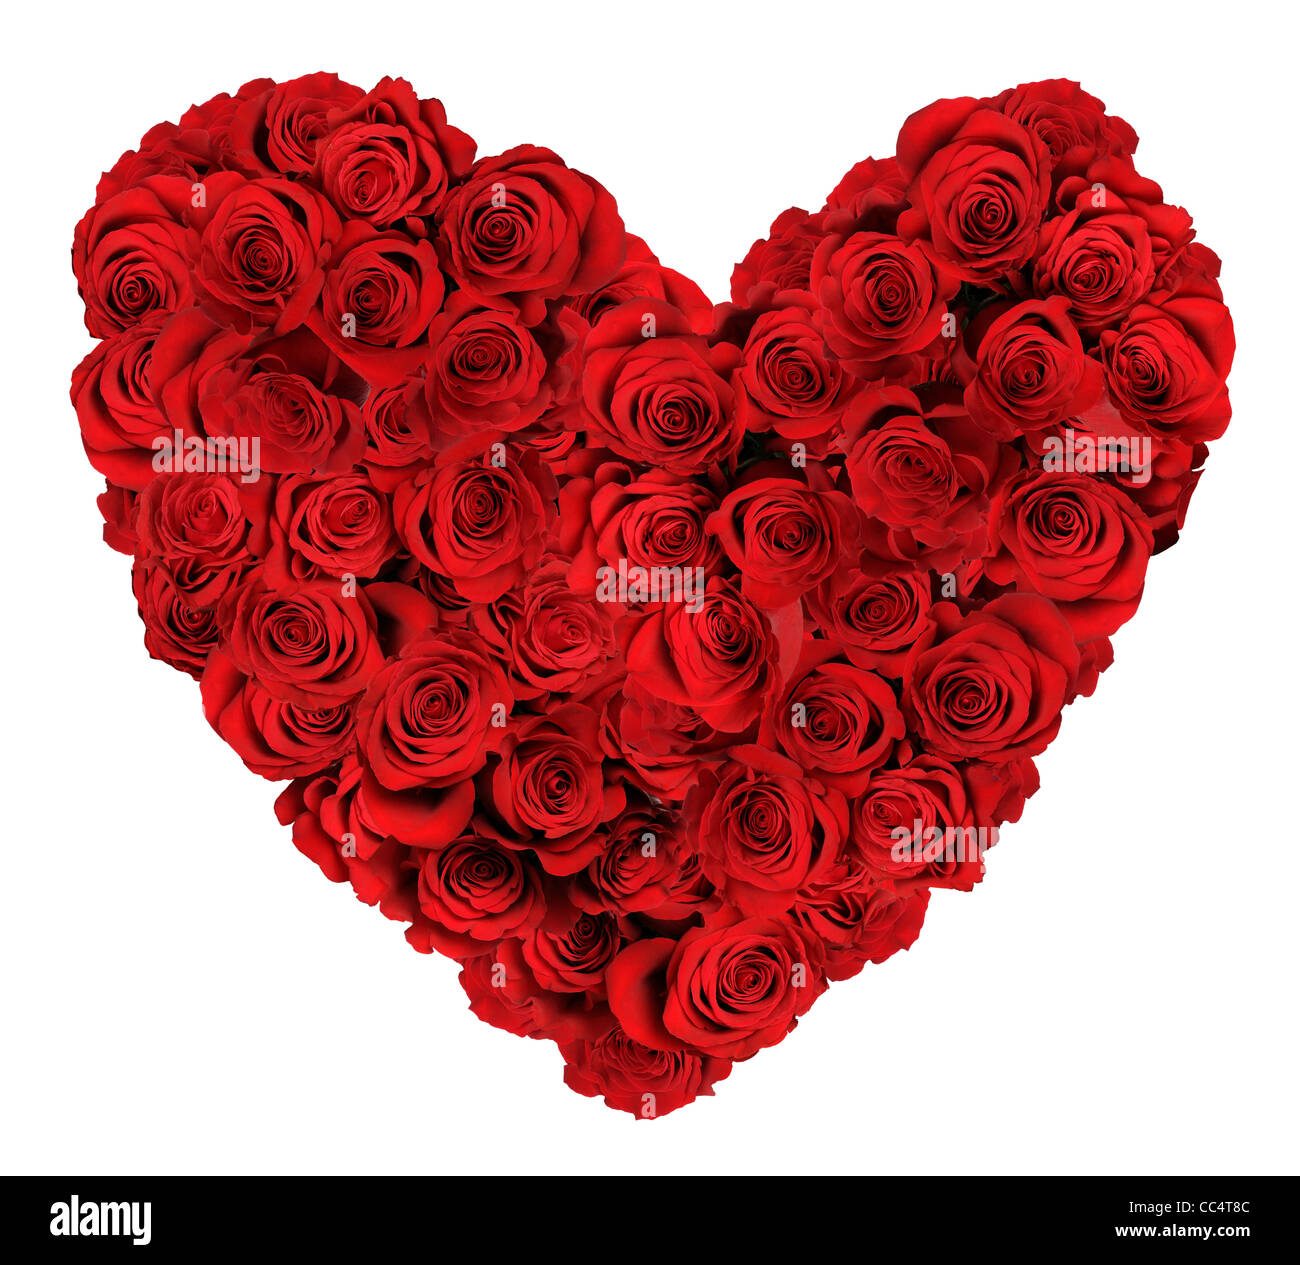 Heart shaped bouquet of red roses isolated over white background Stock Photo